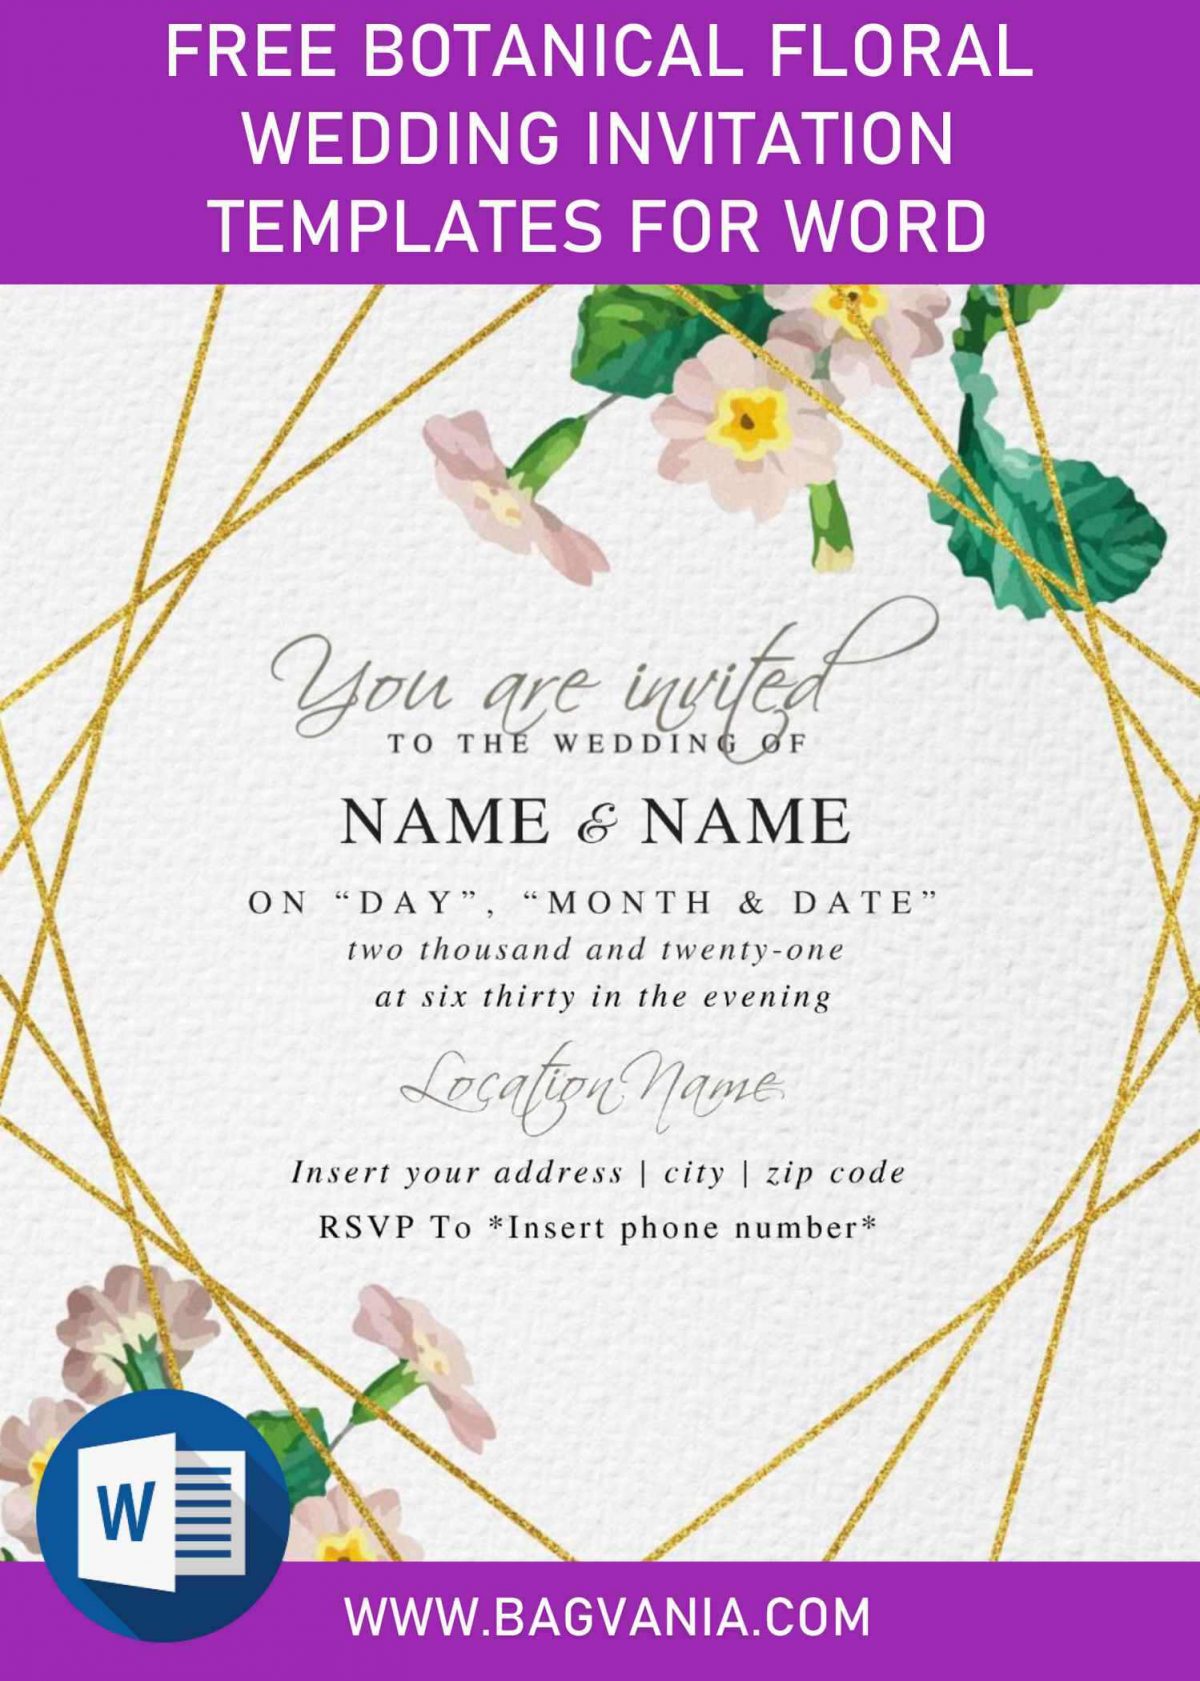 Free Botanical Floral Wedding Invitation Templates For Word